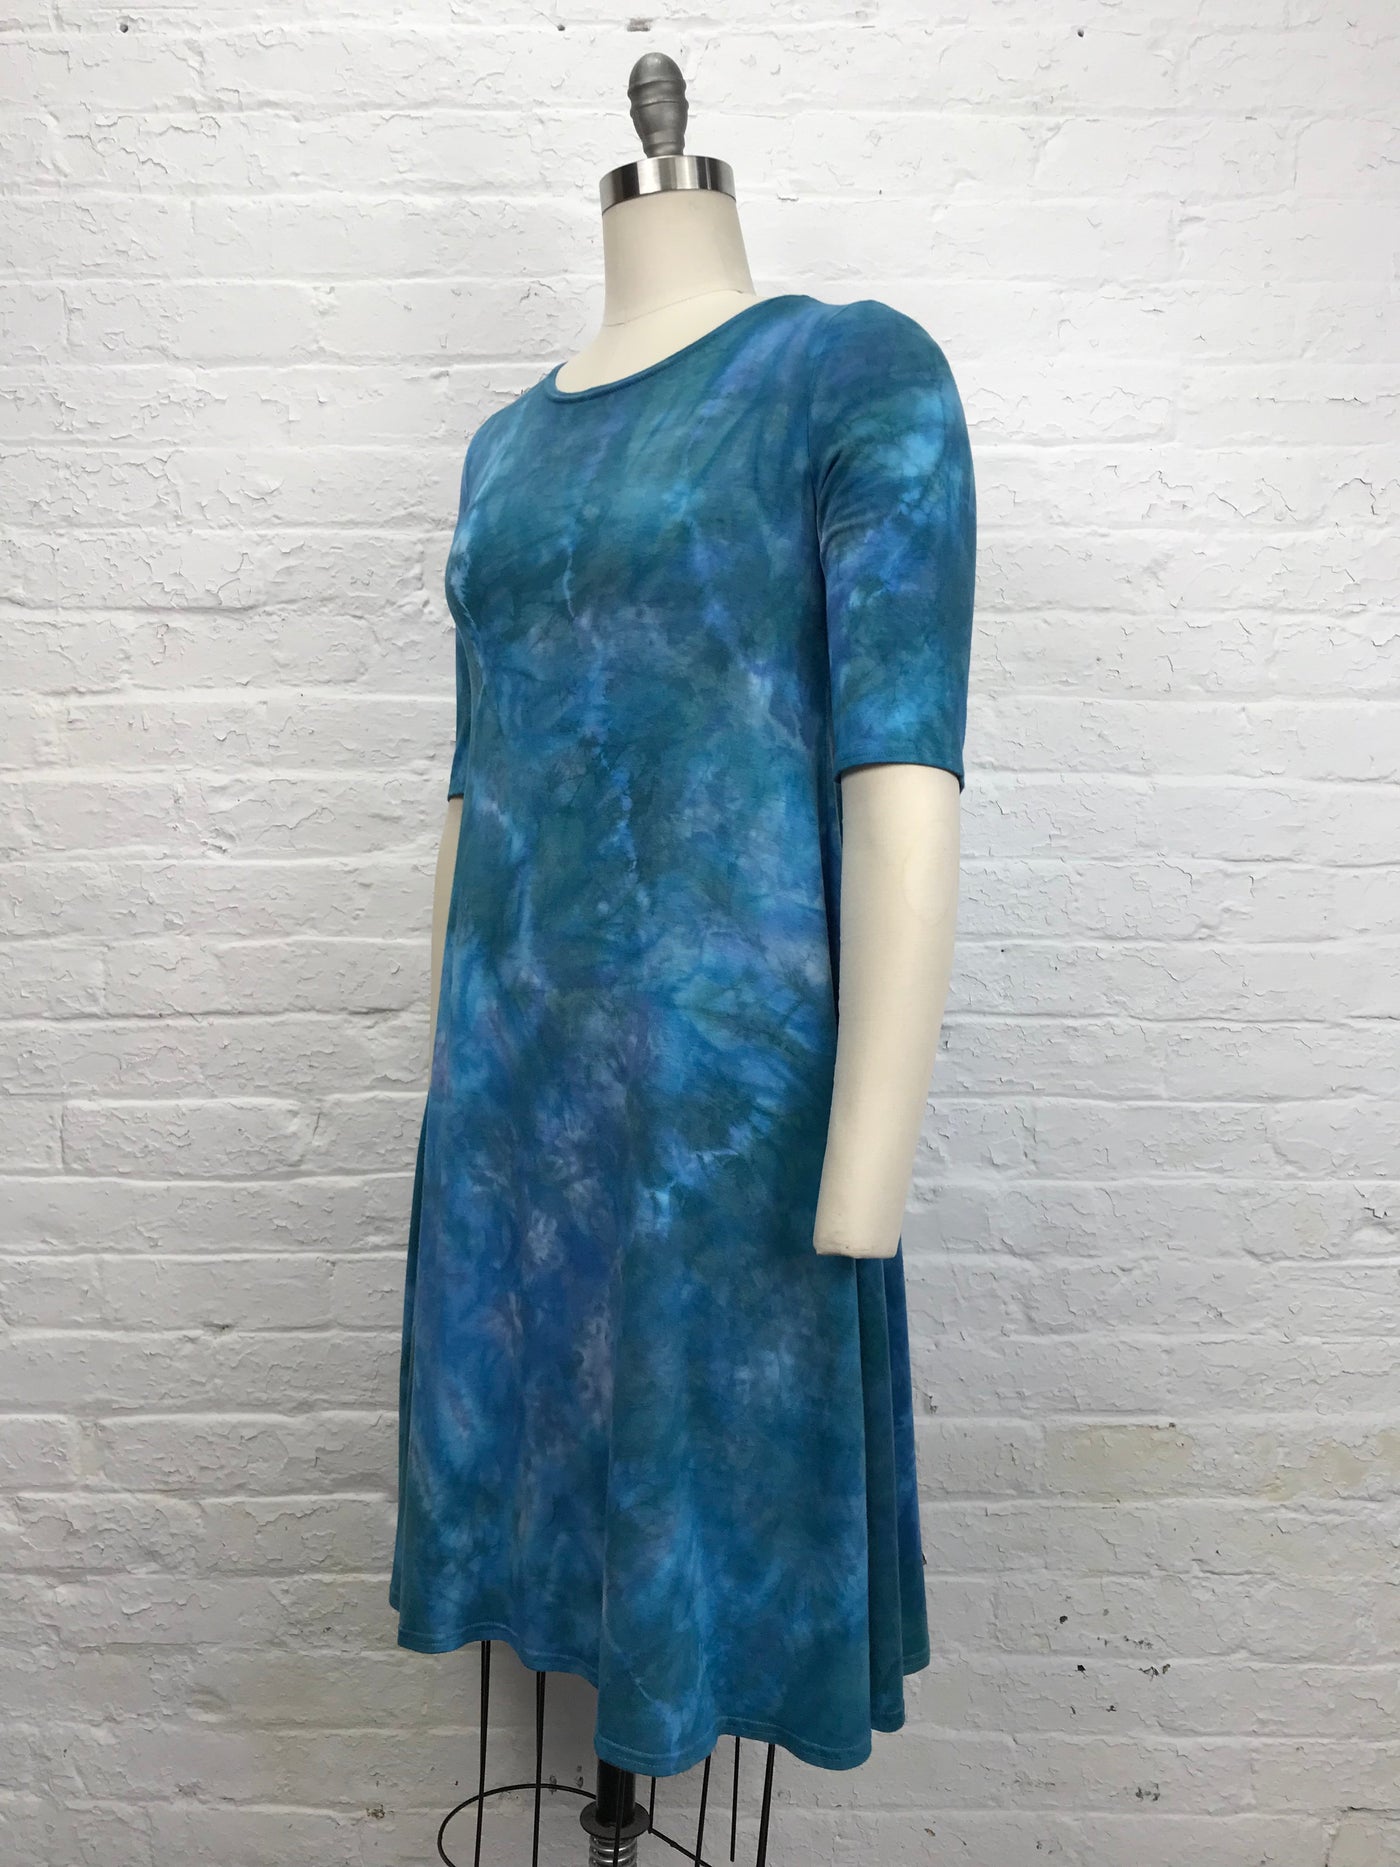 LUCILLE DRESS in Under the Sea